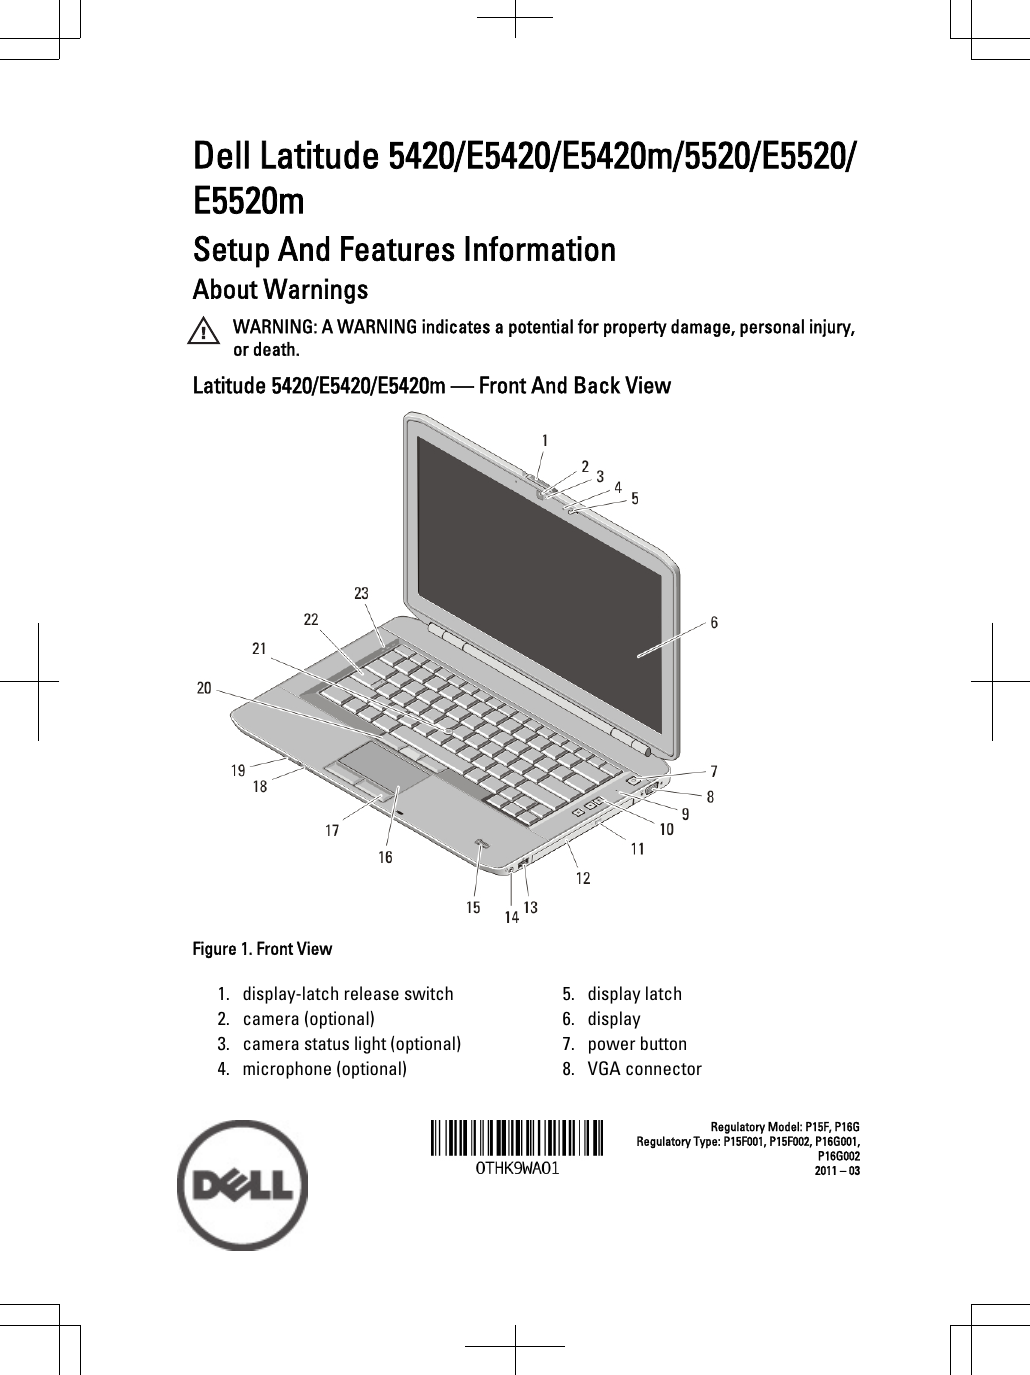 Dell Latitude E5520 Early 2011 Quick Start Guide Setup And Features  Information